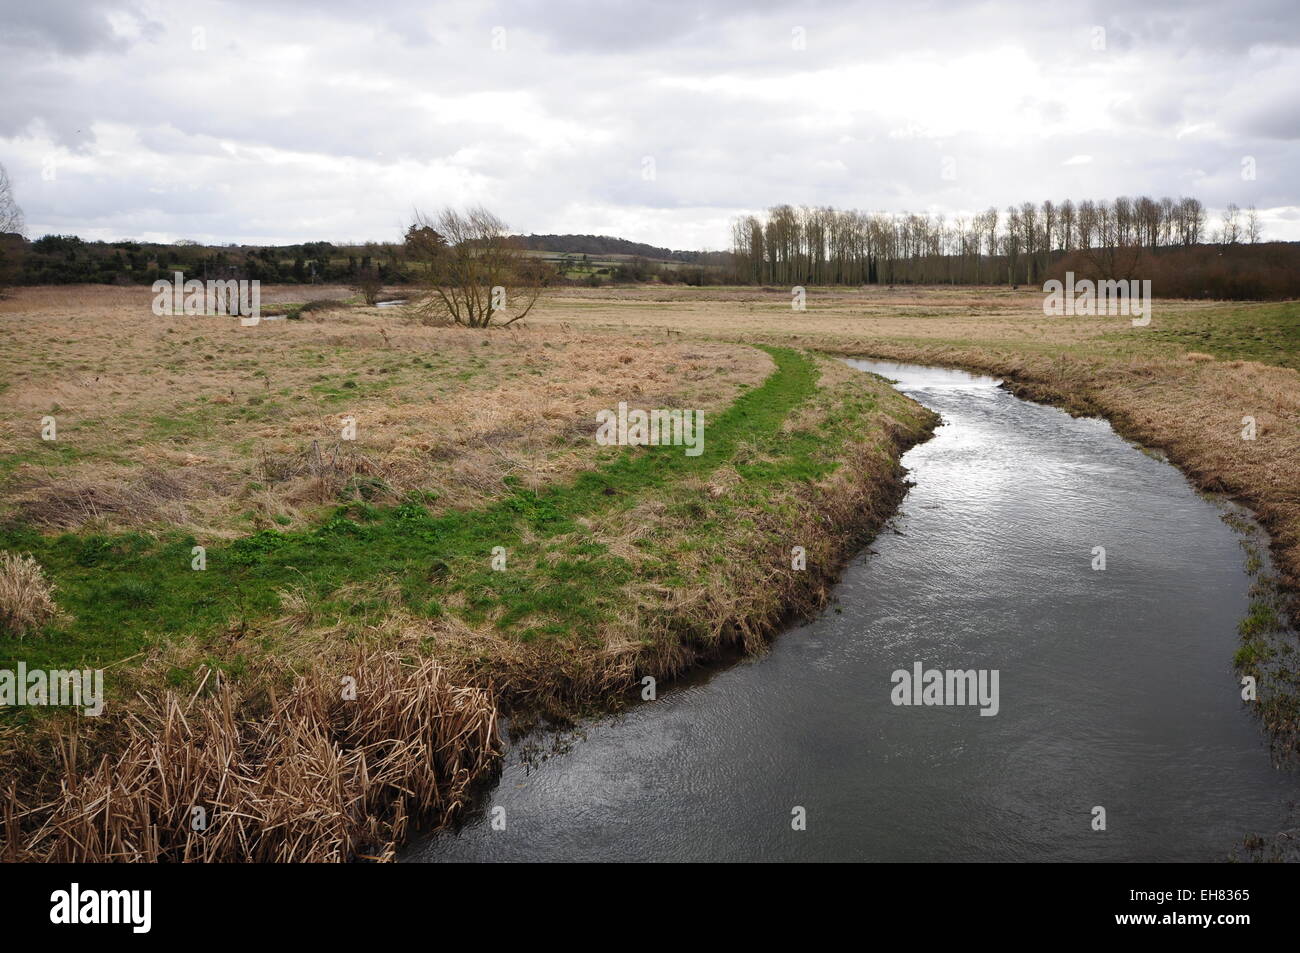 The River Glaven at Wiveton, north Norfolk, looking upstream from Wiveton bridge. . Stock Photo